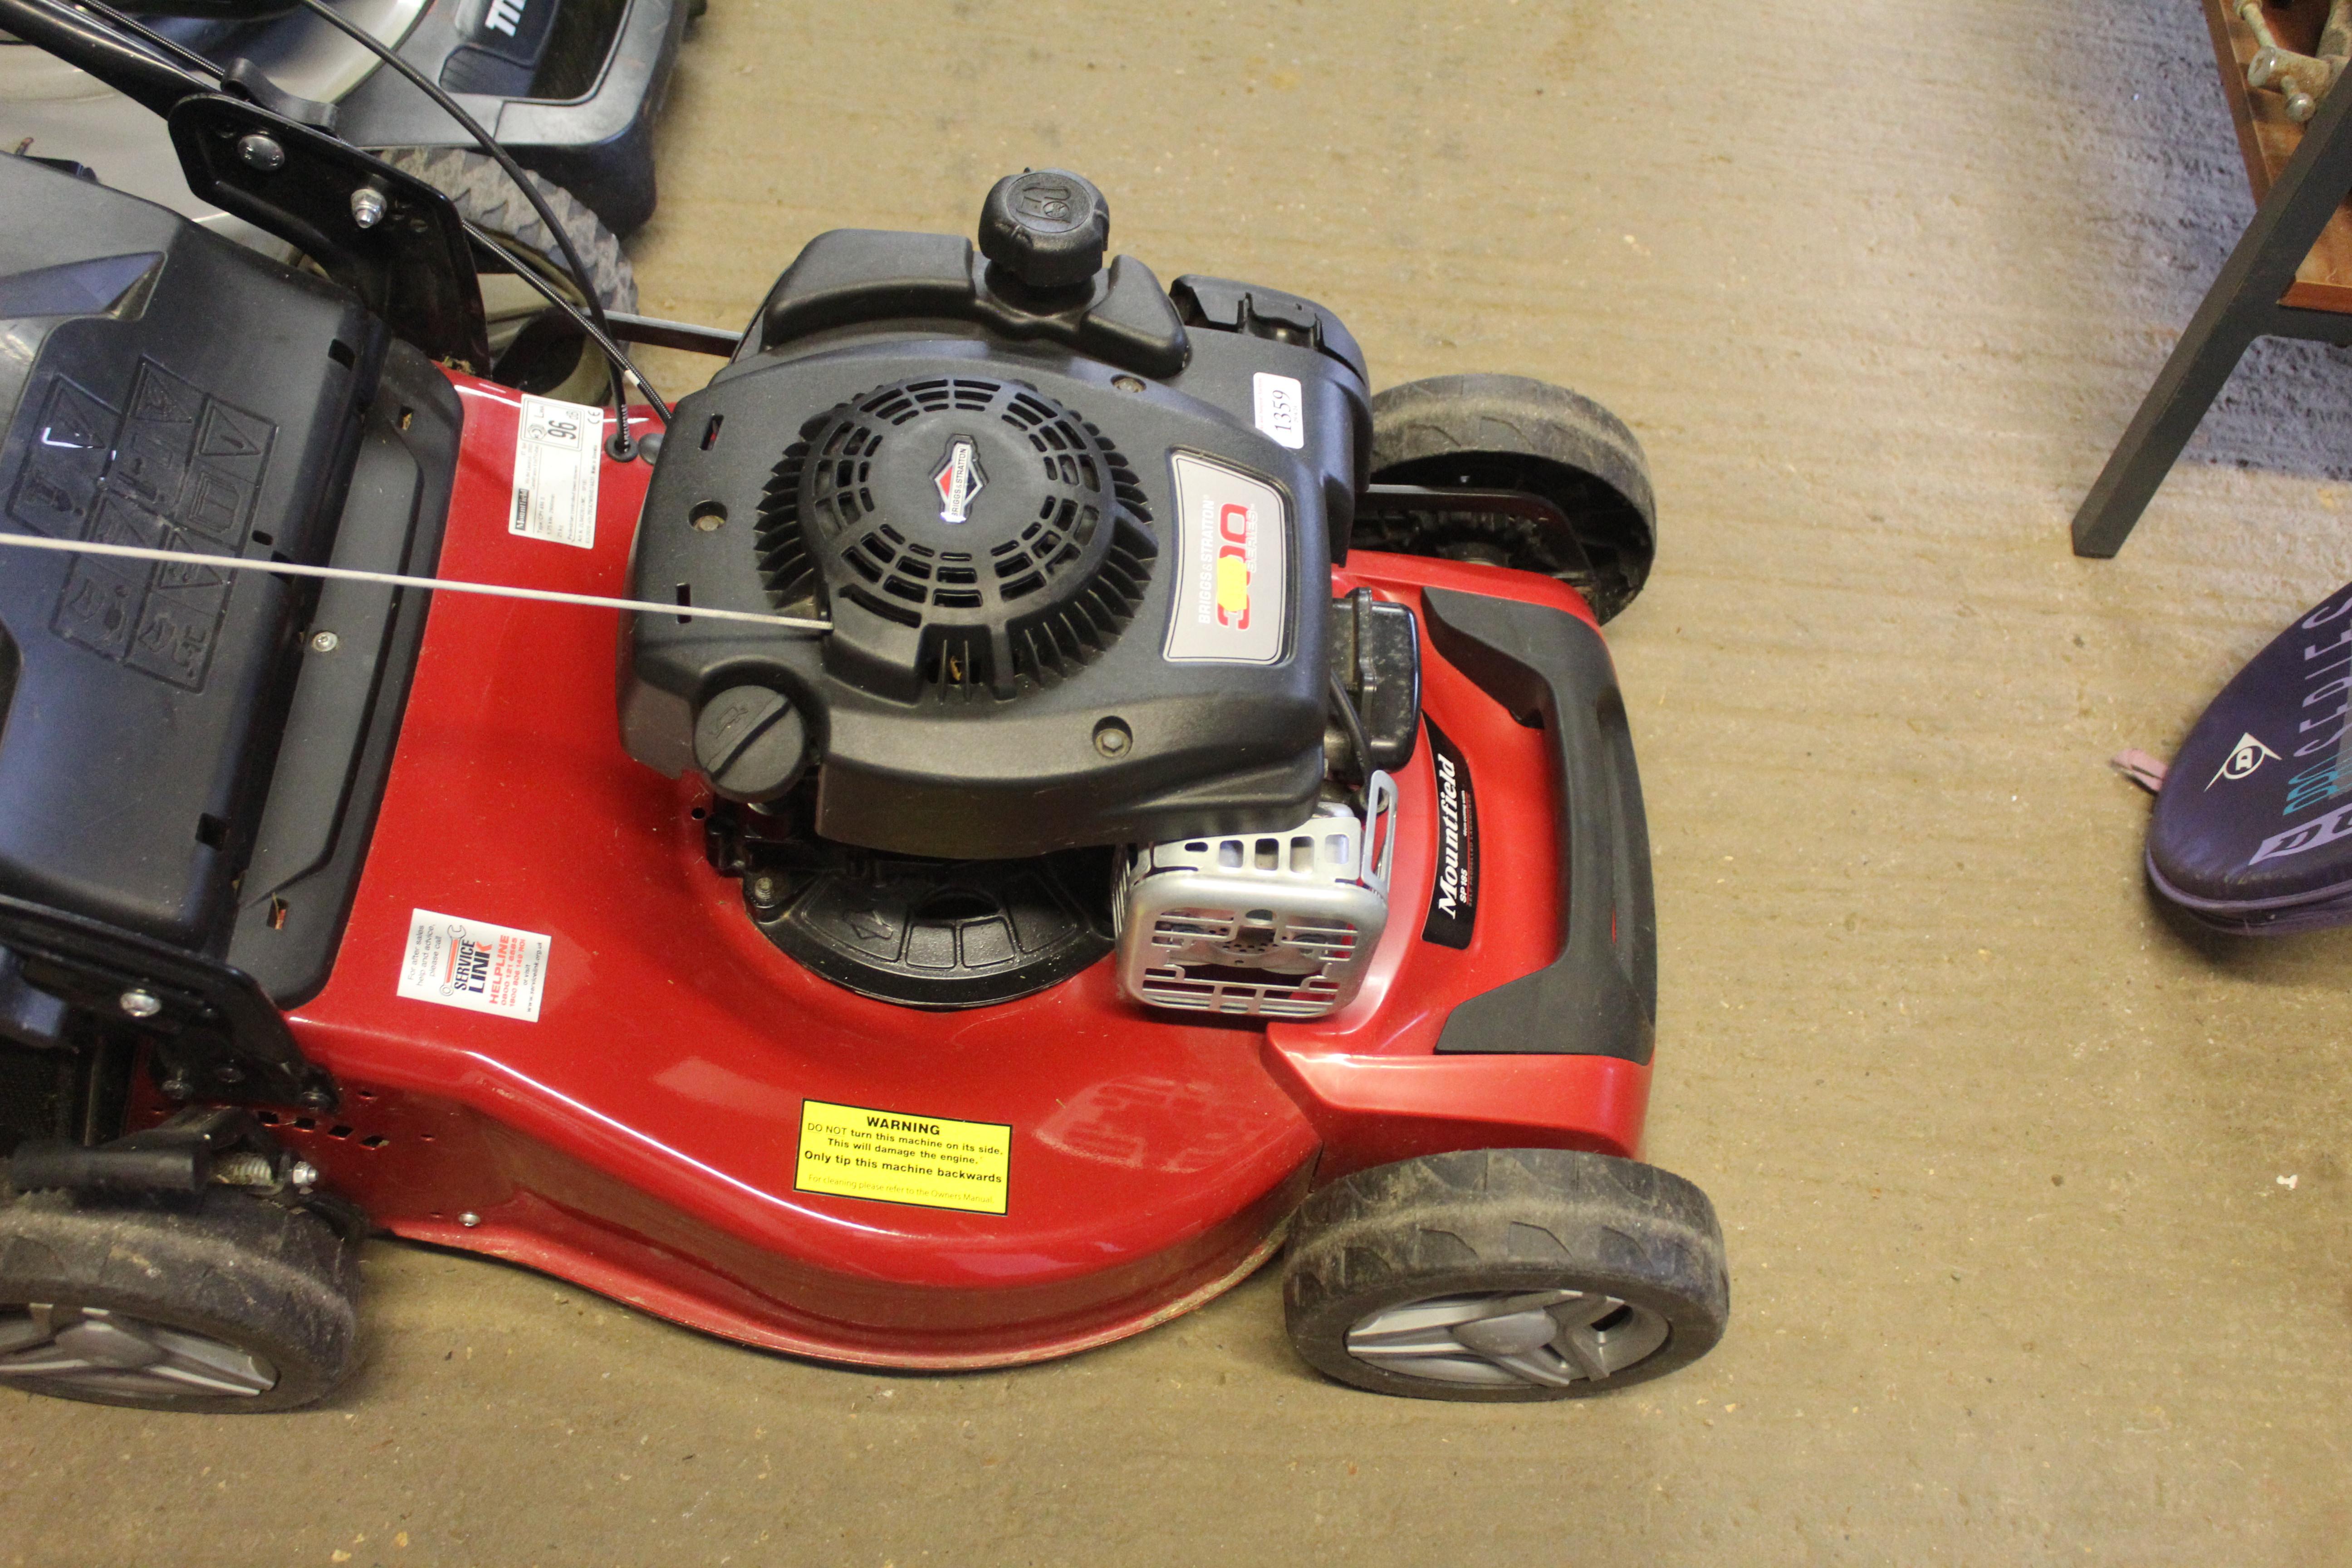 A Mountfield SP185 rotary self propelled lawnmower - Image 3 of 6